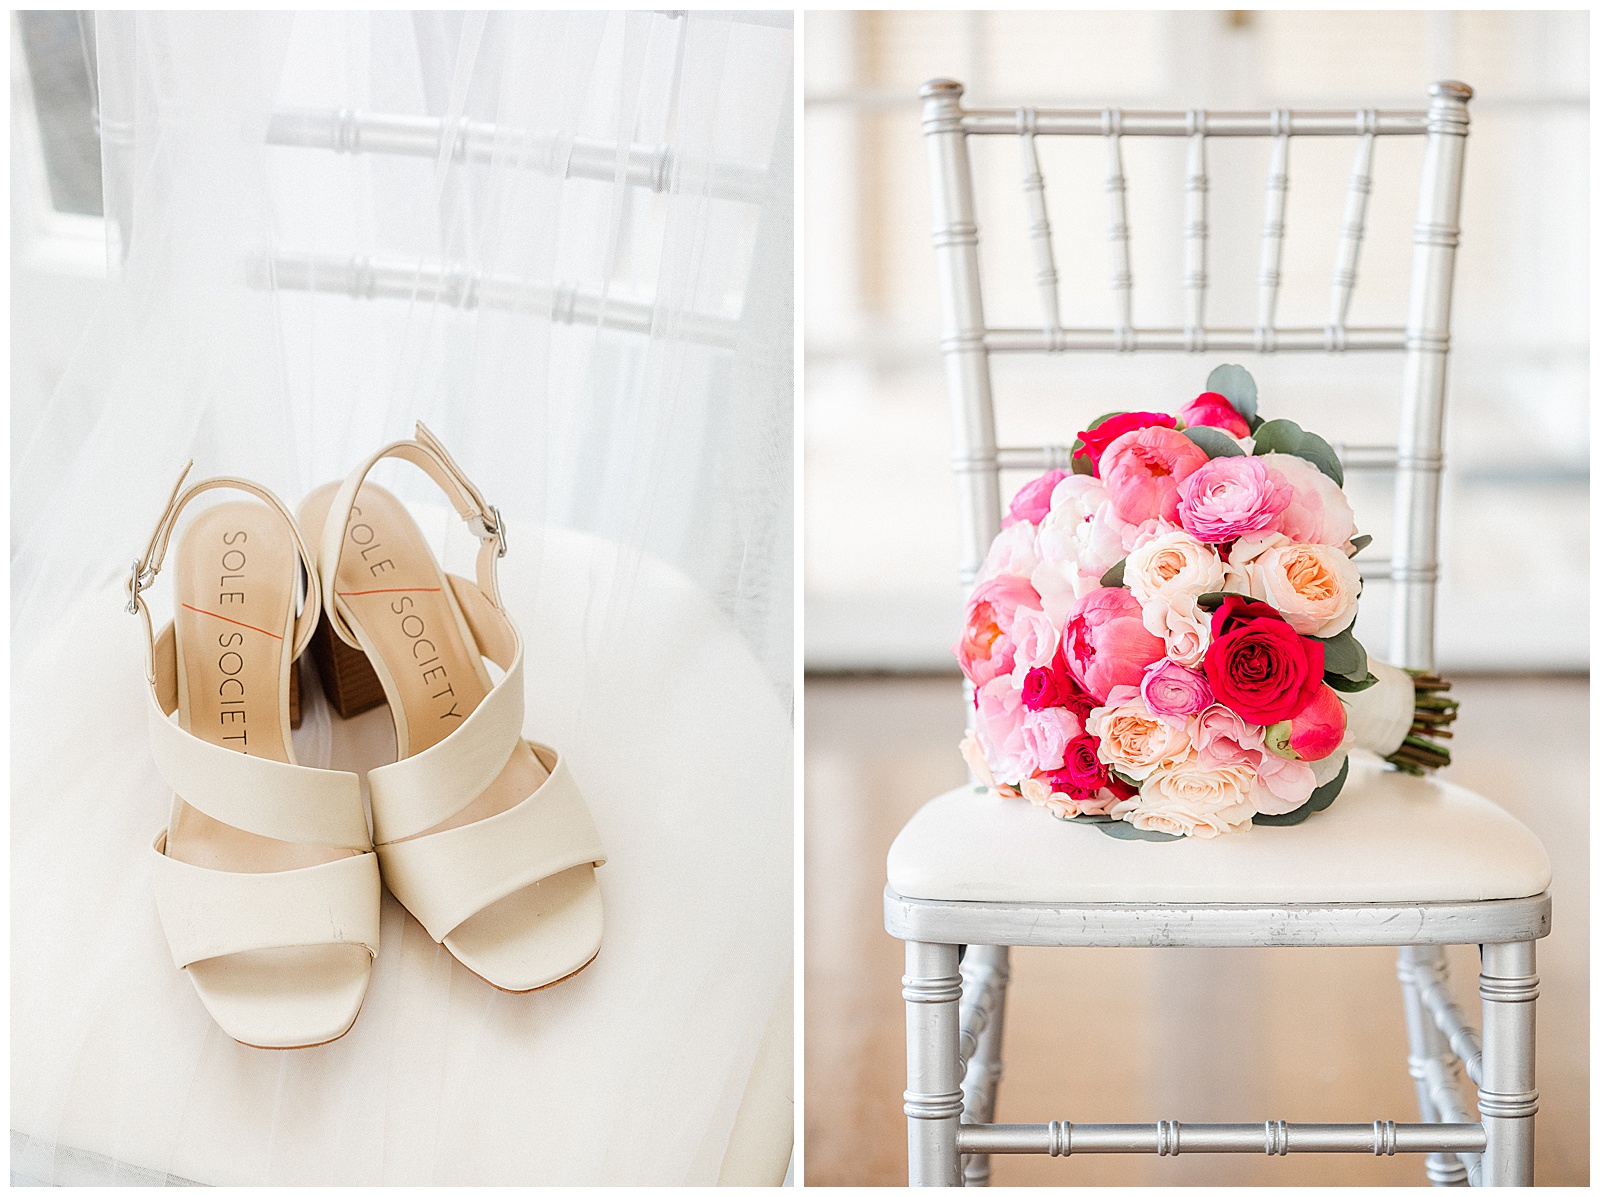 Simple Strappy High Heeled Sandals and Pink Floral Bouquet from Light and Airy Outdoor Wedding at Separk Mansion in Gastonia, NC | Kevyn Dixon Photography